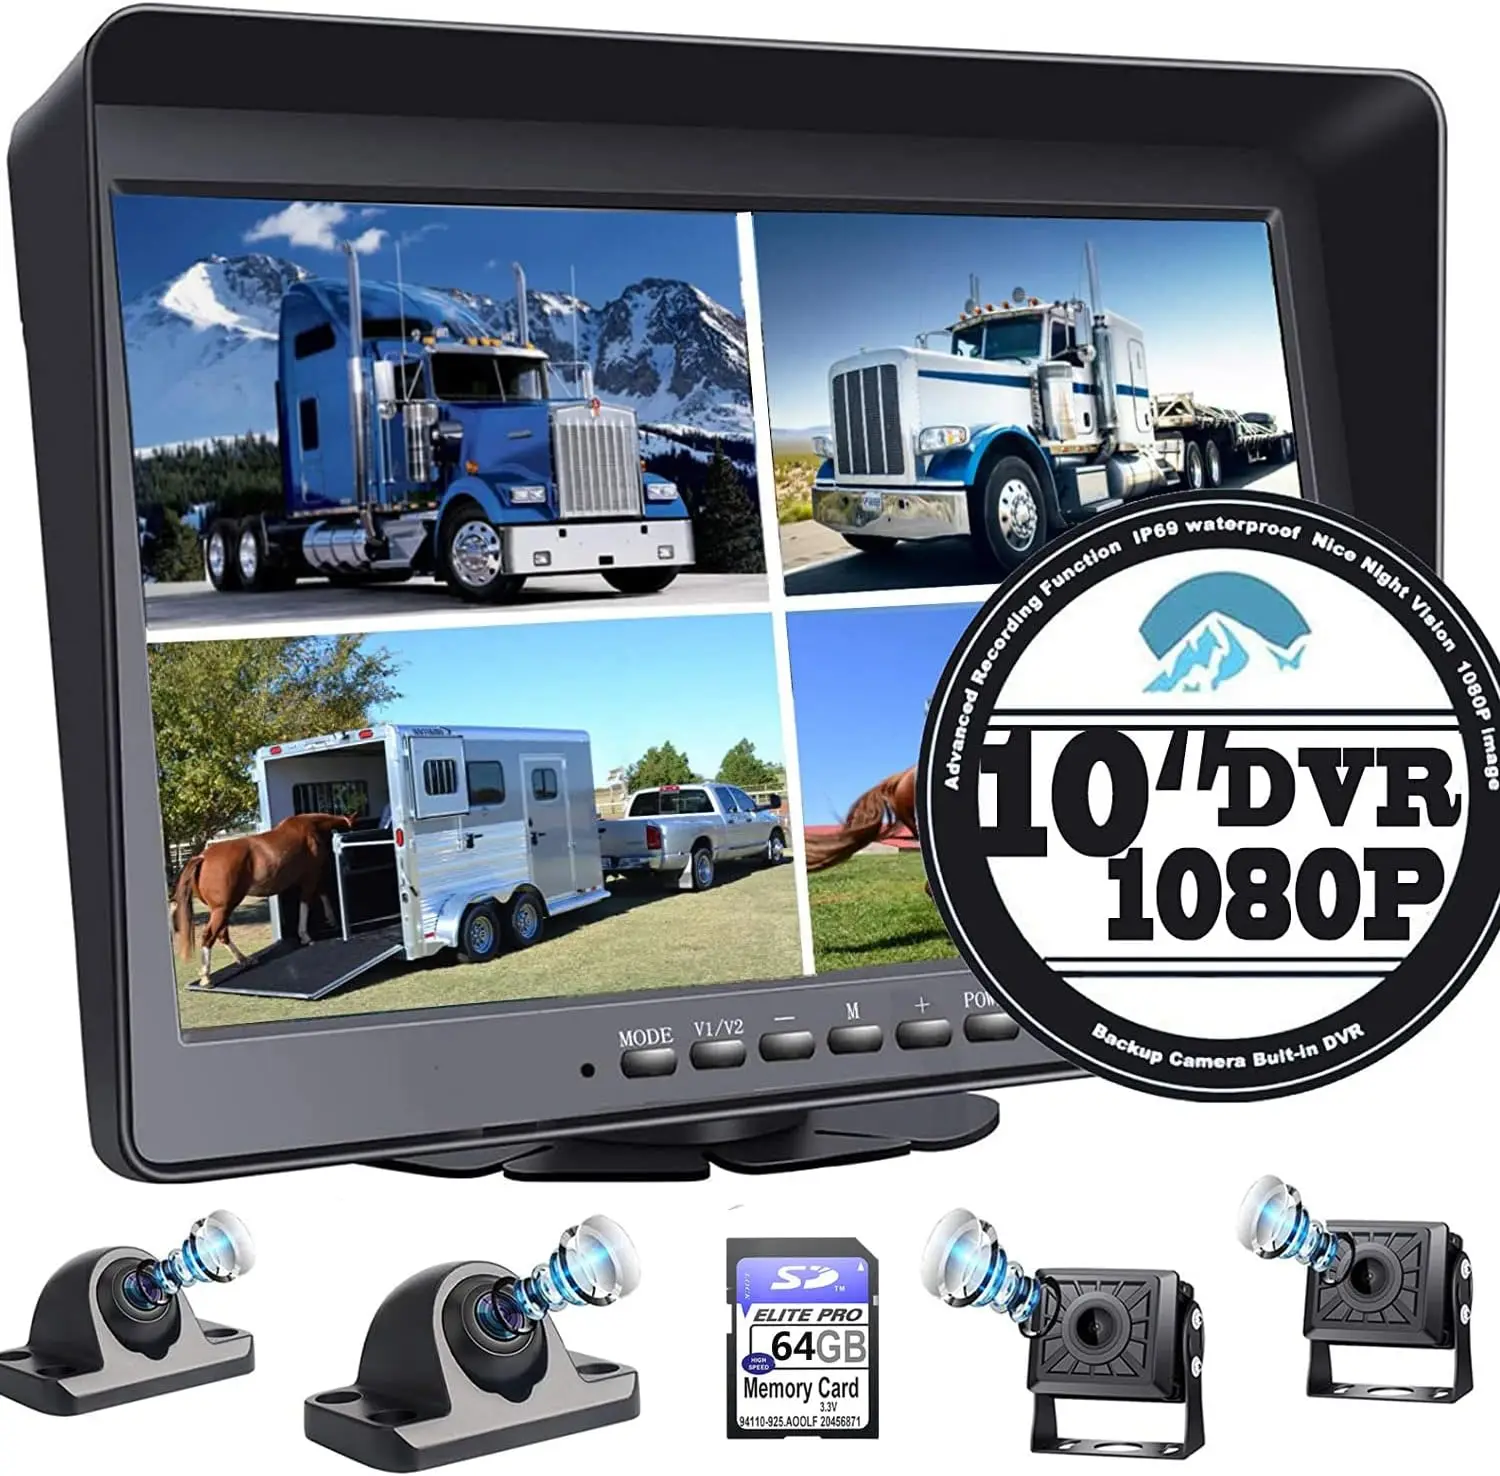 Car Backup Camera Monitor Built-in DVR for RV Truck Trailer Rear Side Front Reversing View Wired System FHD Image 4 Split Screen 1080p 720p auto vehicle camera reverse bus lcd monitor 7 inch car rear view system for truck van tractor